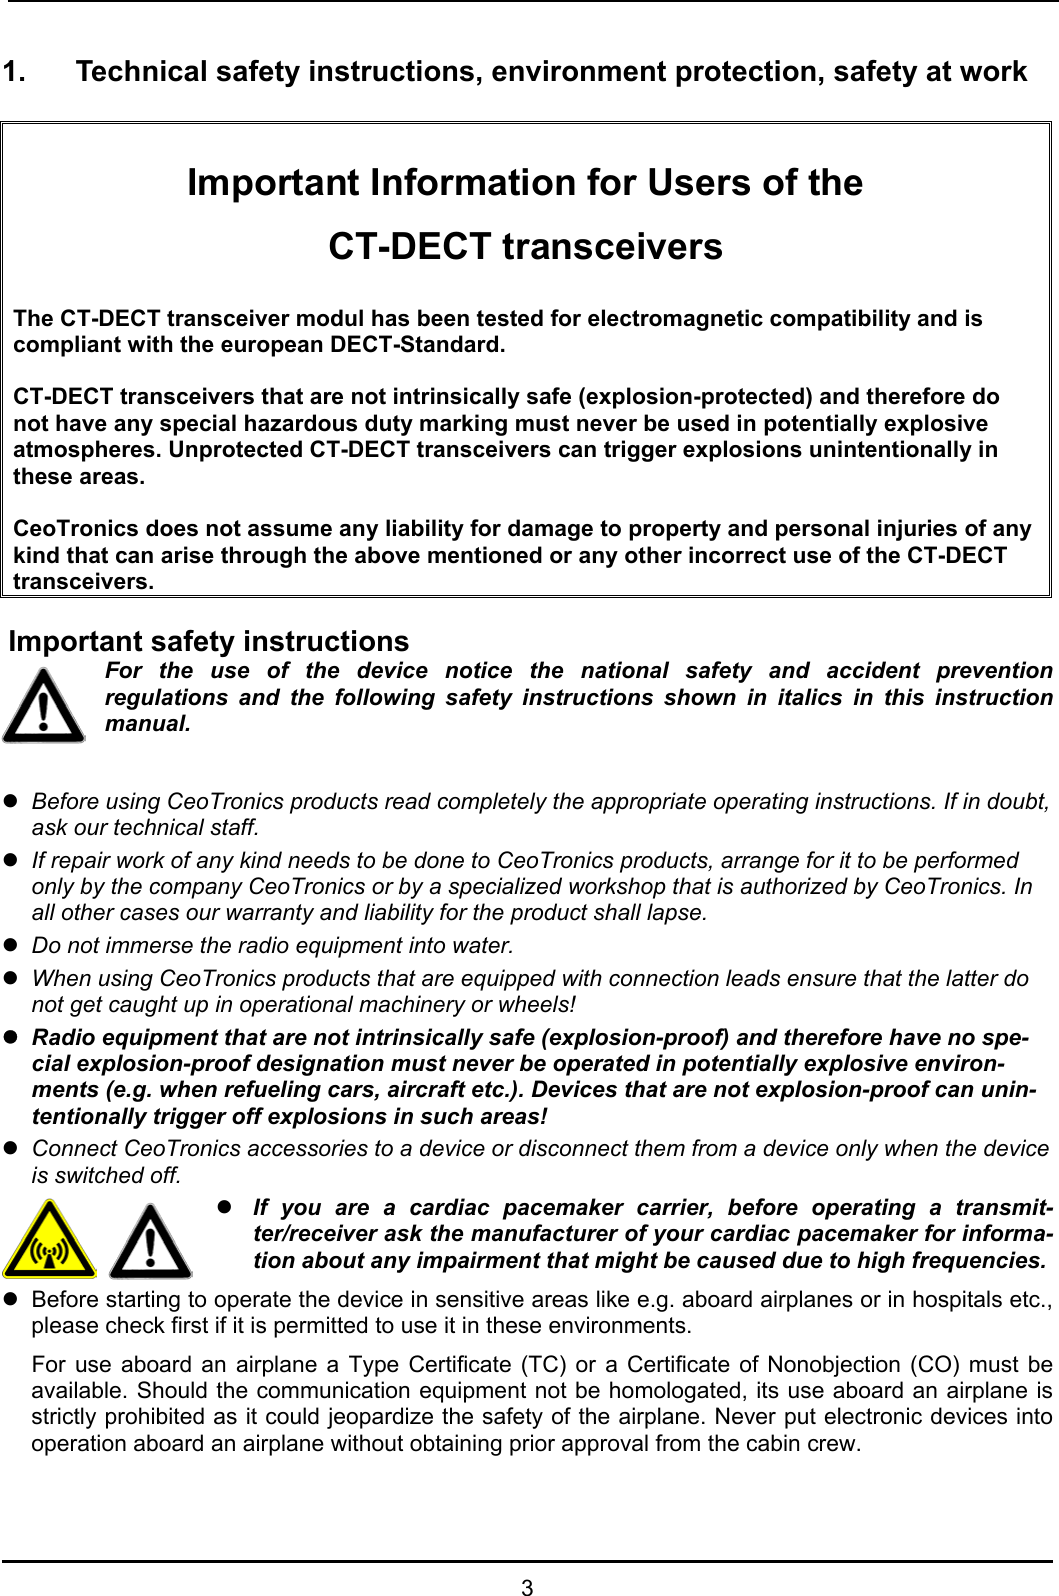   3 1.  Technical safety instructions, environment protection, safety at work   Important Information for Users of the CT-DECT transceivers  The CT-DECT transceiver modul has been tested for electromagnetic compatibility and is compliant with the european DECT-Standard.   CT-DECT transceivers that are not intrinsically safe (explosion-protected) and therefore do not have any special hazardous duty marking must never be used in potentially explosive atmospheres. Unprotected CT-DECT transceivers can trigger explosions unintentionally in these areas.  CeoTronics does not assume any liability for damage to property and personal injuries of any kind that can arise through the above mentioned or any other incorrect use of the CT-DECT transceivers.   Important safety instructions For the use of the device notice the national safety and accident prevention regulations and the following safety instructions shown in italics in this instruction manual.  z Before using CeoTronics products read completely the appropriate operating instructions. If in doubt, ask our technical staff. z If repair work of any kind needs to be done to CeoTronics products, arrange for it to be performed only by the company CeoTronics or by a specialized workshop that is authorized by CeoTronics. In all other cases our warranty and liability for the product shall lapse. z Do not immerse the radio equipment into water. z When using CeoTronics products that are equipped with connection leads ensure that the latter do not get caught up in operational machinery or wheels! z Radio equipment that are not intrinsically safe (explosion-proof) and therefore have no spe-cial explosion-proof designation must never be operated in potentially explosive environ-ments (e.g. when refueling cars, aircraft etc.). Devices that are not explosion-proof can unin-tentionally trigger off explosions in such areas! z Connect CeoTronics accessories to a device or disconnect them from a device only when the device is switched off.   z If you are a cardiac pacemaker carrier, before operating a transmit-ter/receiver ask the manufacturer of your cardiac pacemaker for informa-tion about any impairment that might be caused due to high frequencies. z  Before starting to operate the device in sensitive areas like e.g. aboard airplanes or in hospitals etc., please check first if it is permitted to use it in these environments.   For use aboard an airplane a Type Certificate (TC) or a Certificate of Nonobjection (CO) must be available. Should the communication equipment not be homologated, its use aboard an airplane is strictly prohibited as it could jeopardize the safety of the airplane. Never put electronic devices into operation aboard an airplane without obtaining prior approval from the cabin crew. 